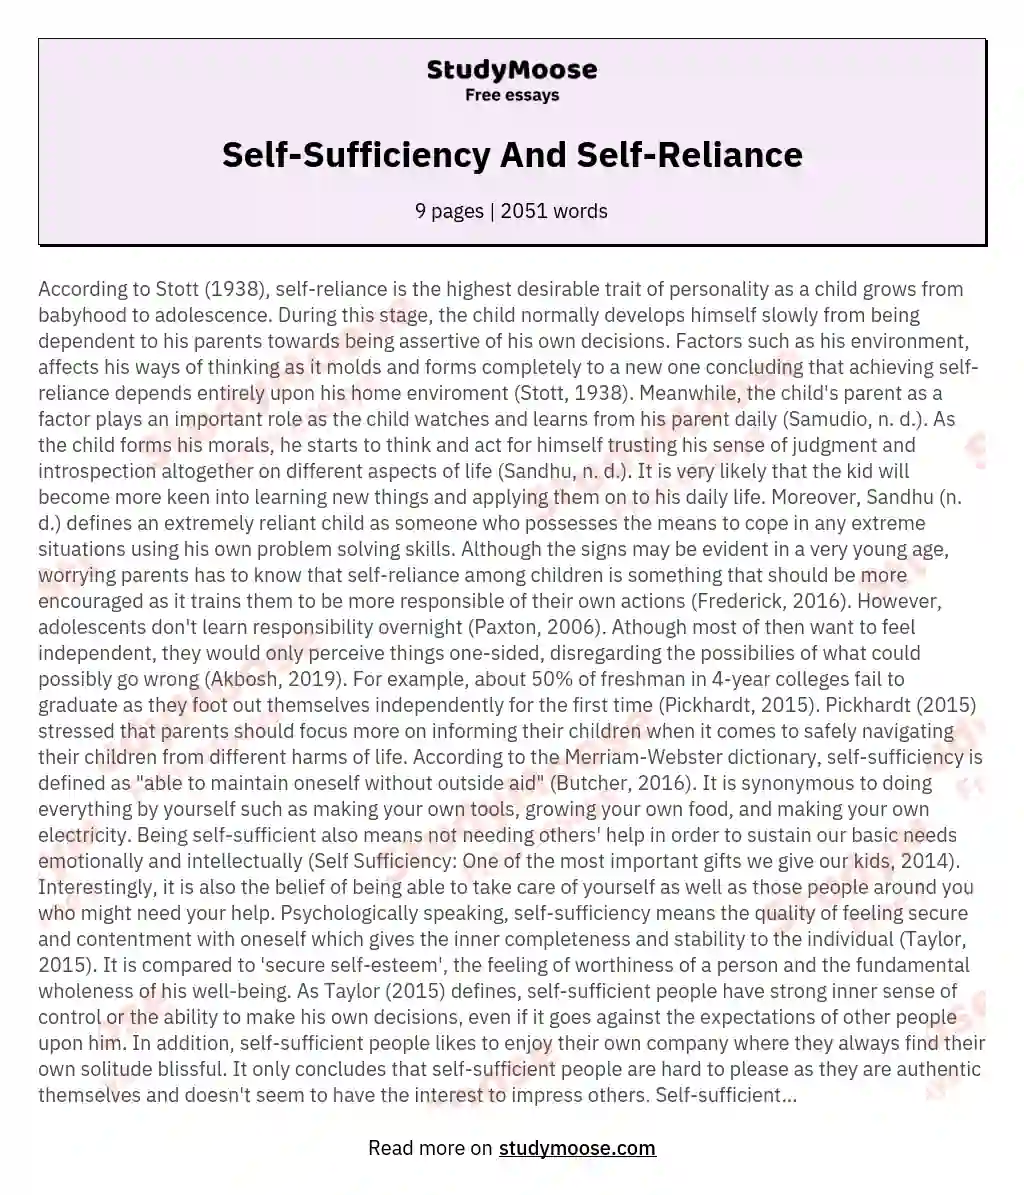 Self-Sufficiency And Self-Reliance essay